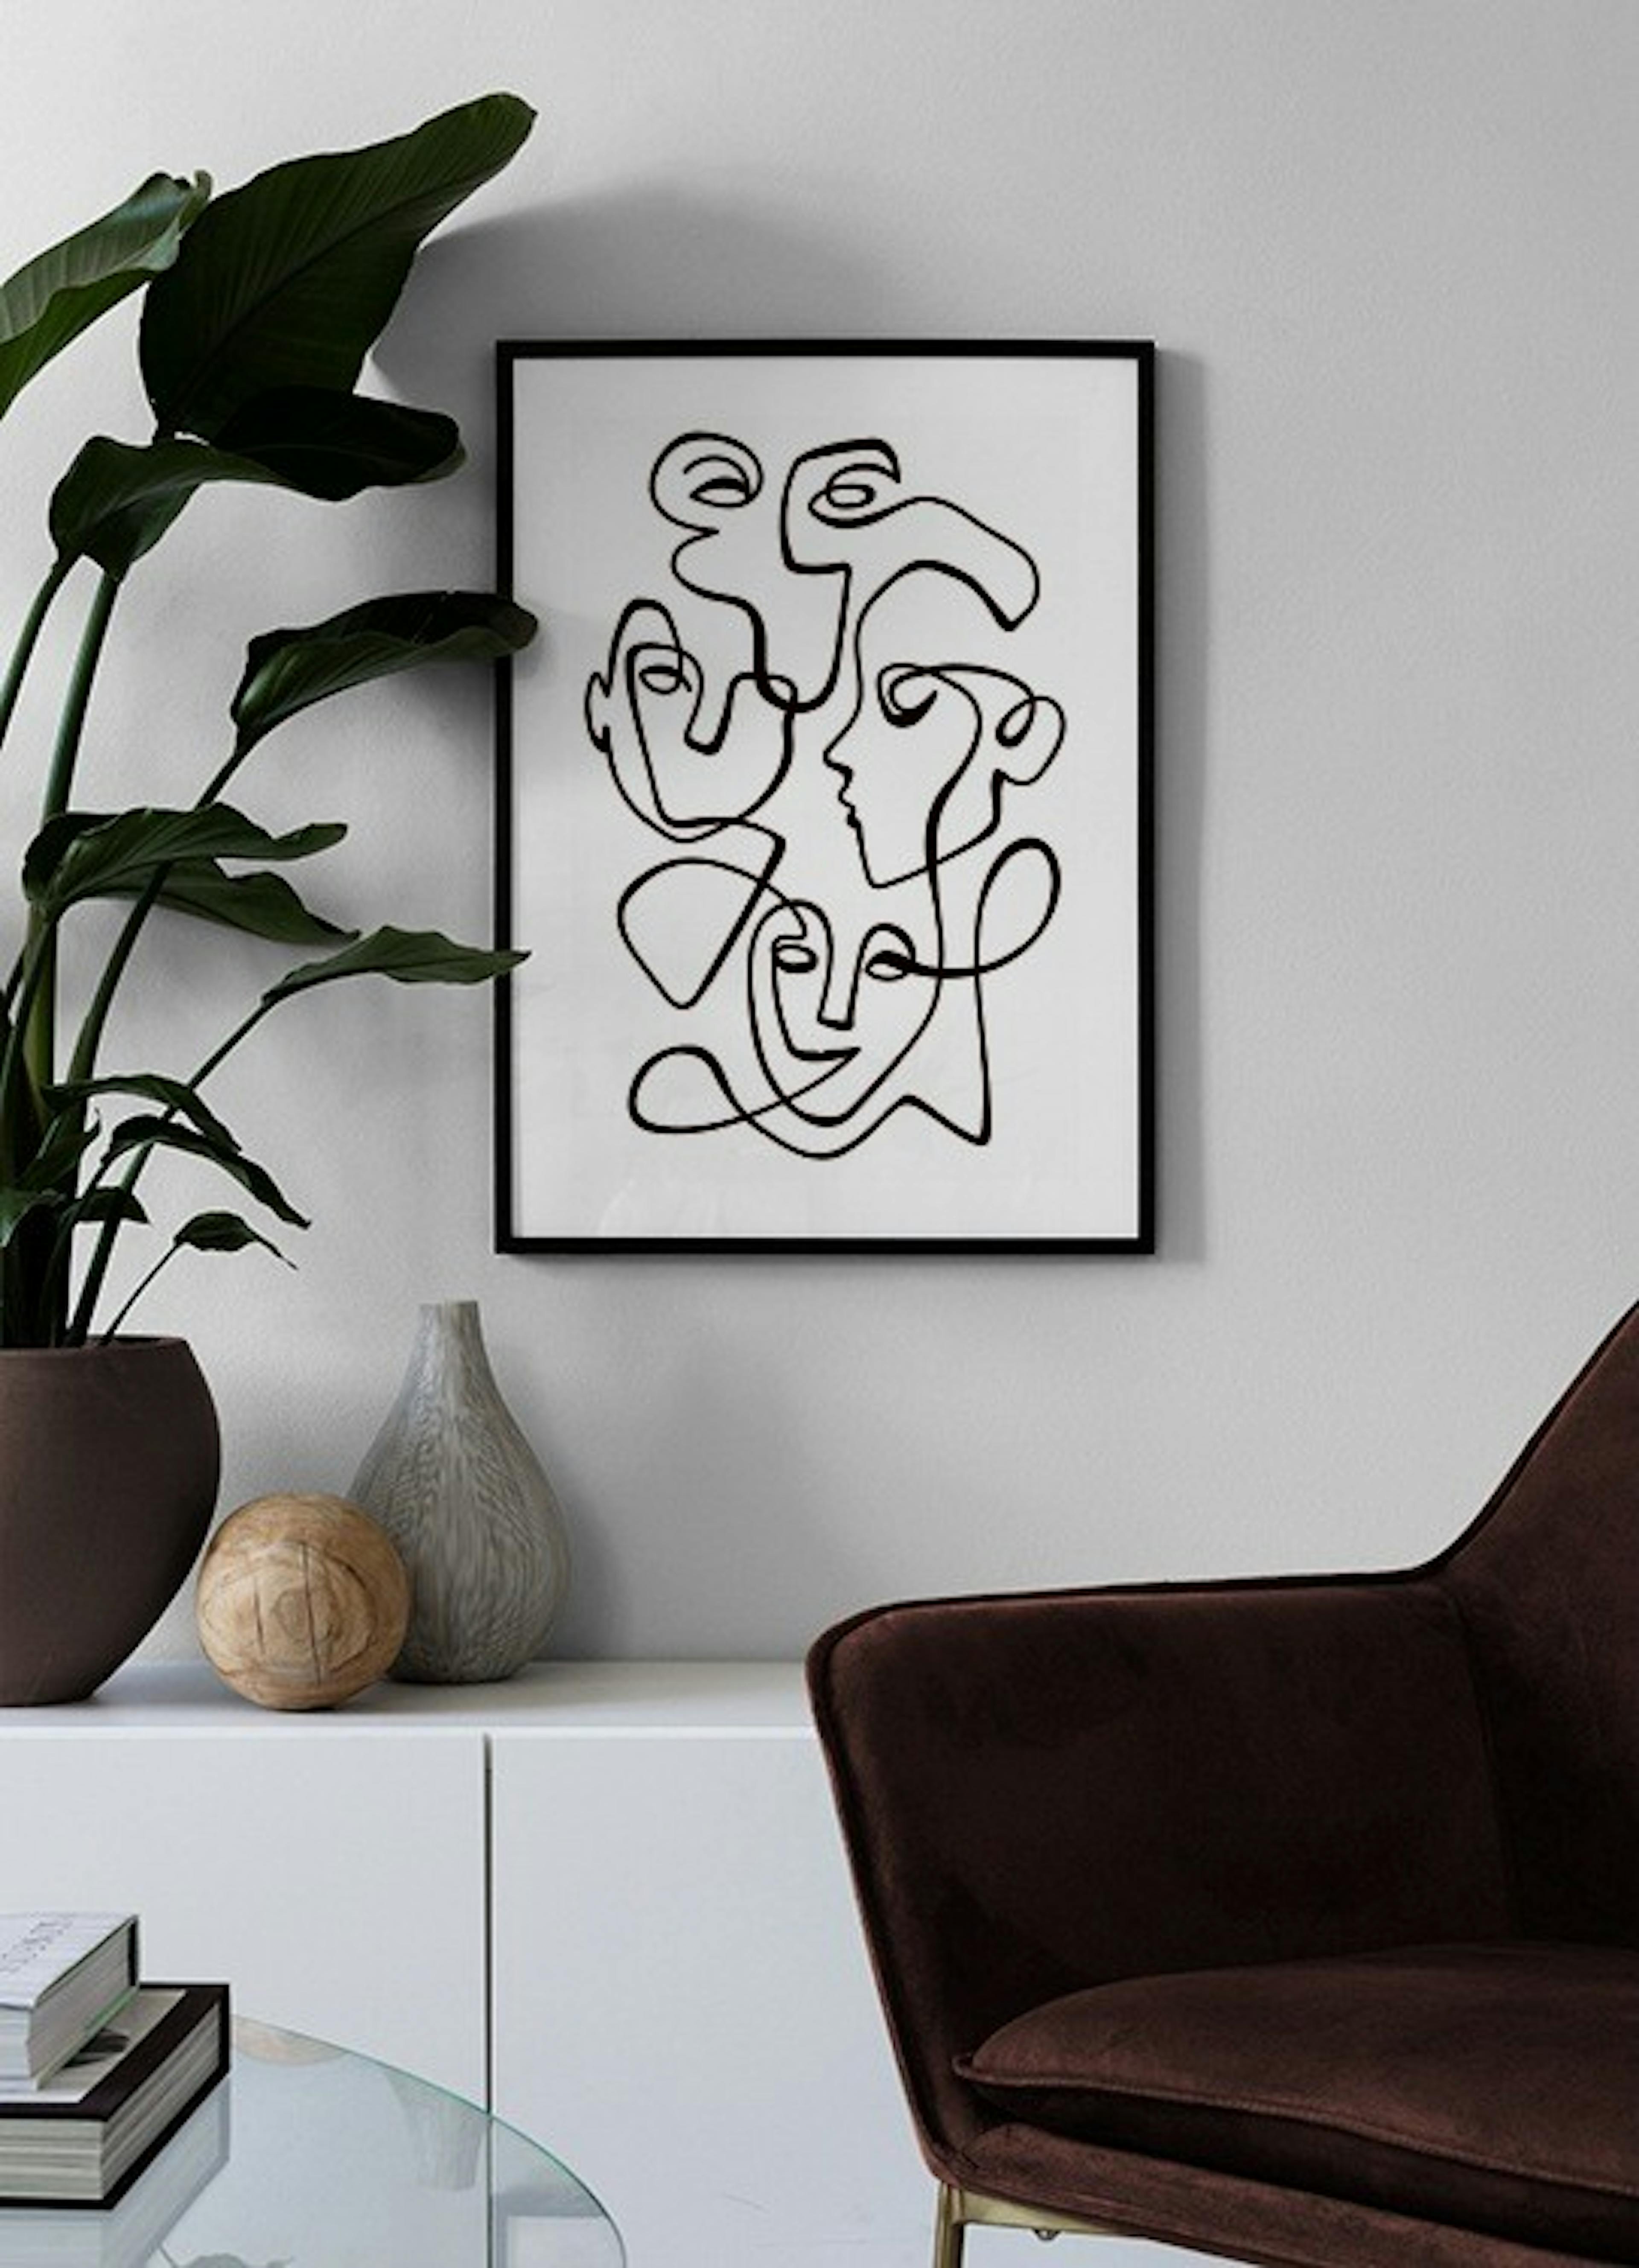 Abstract Line People No2 Poster